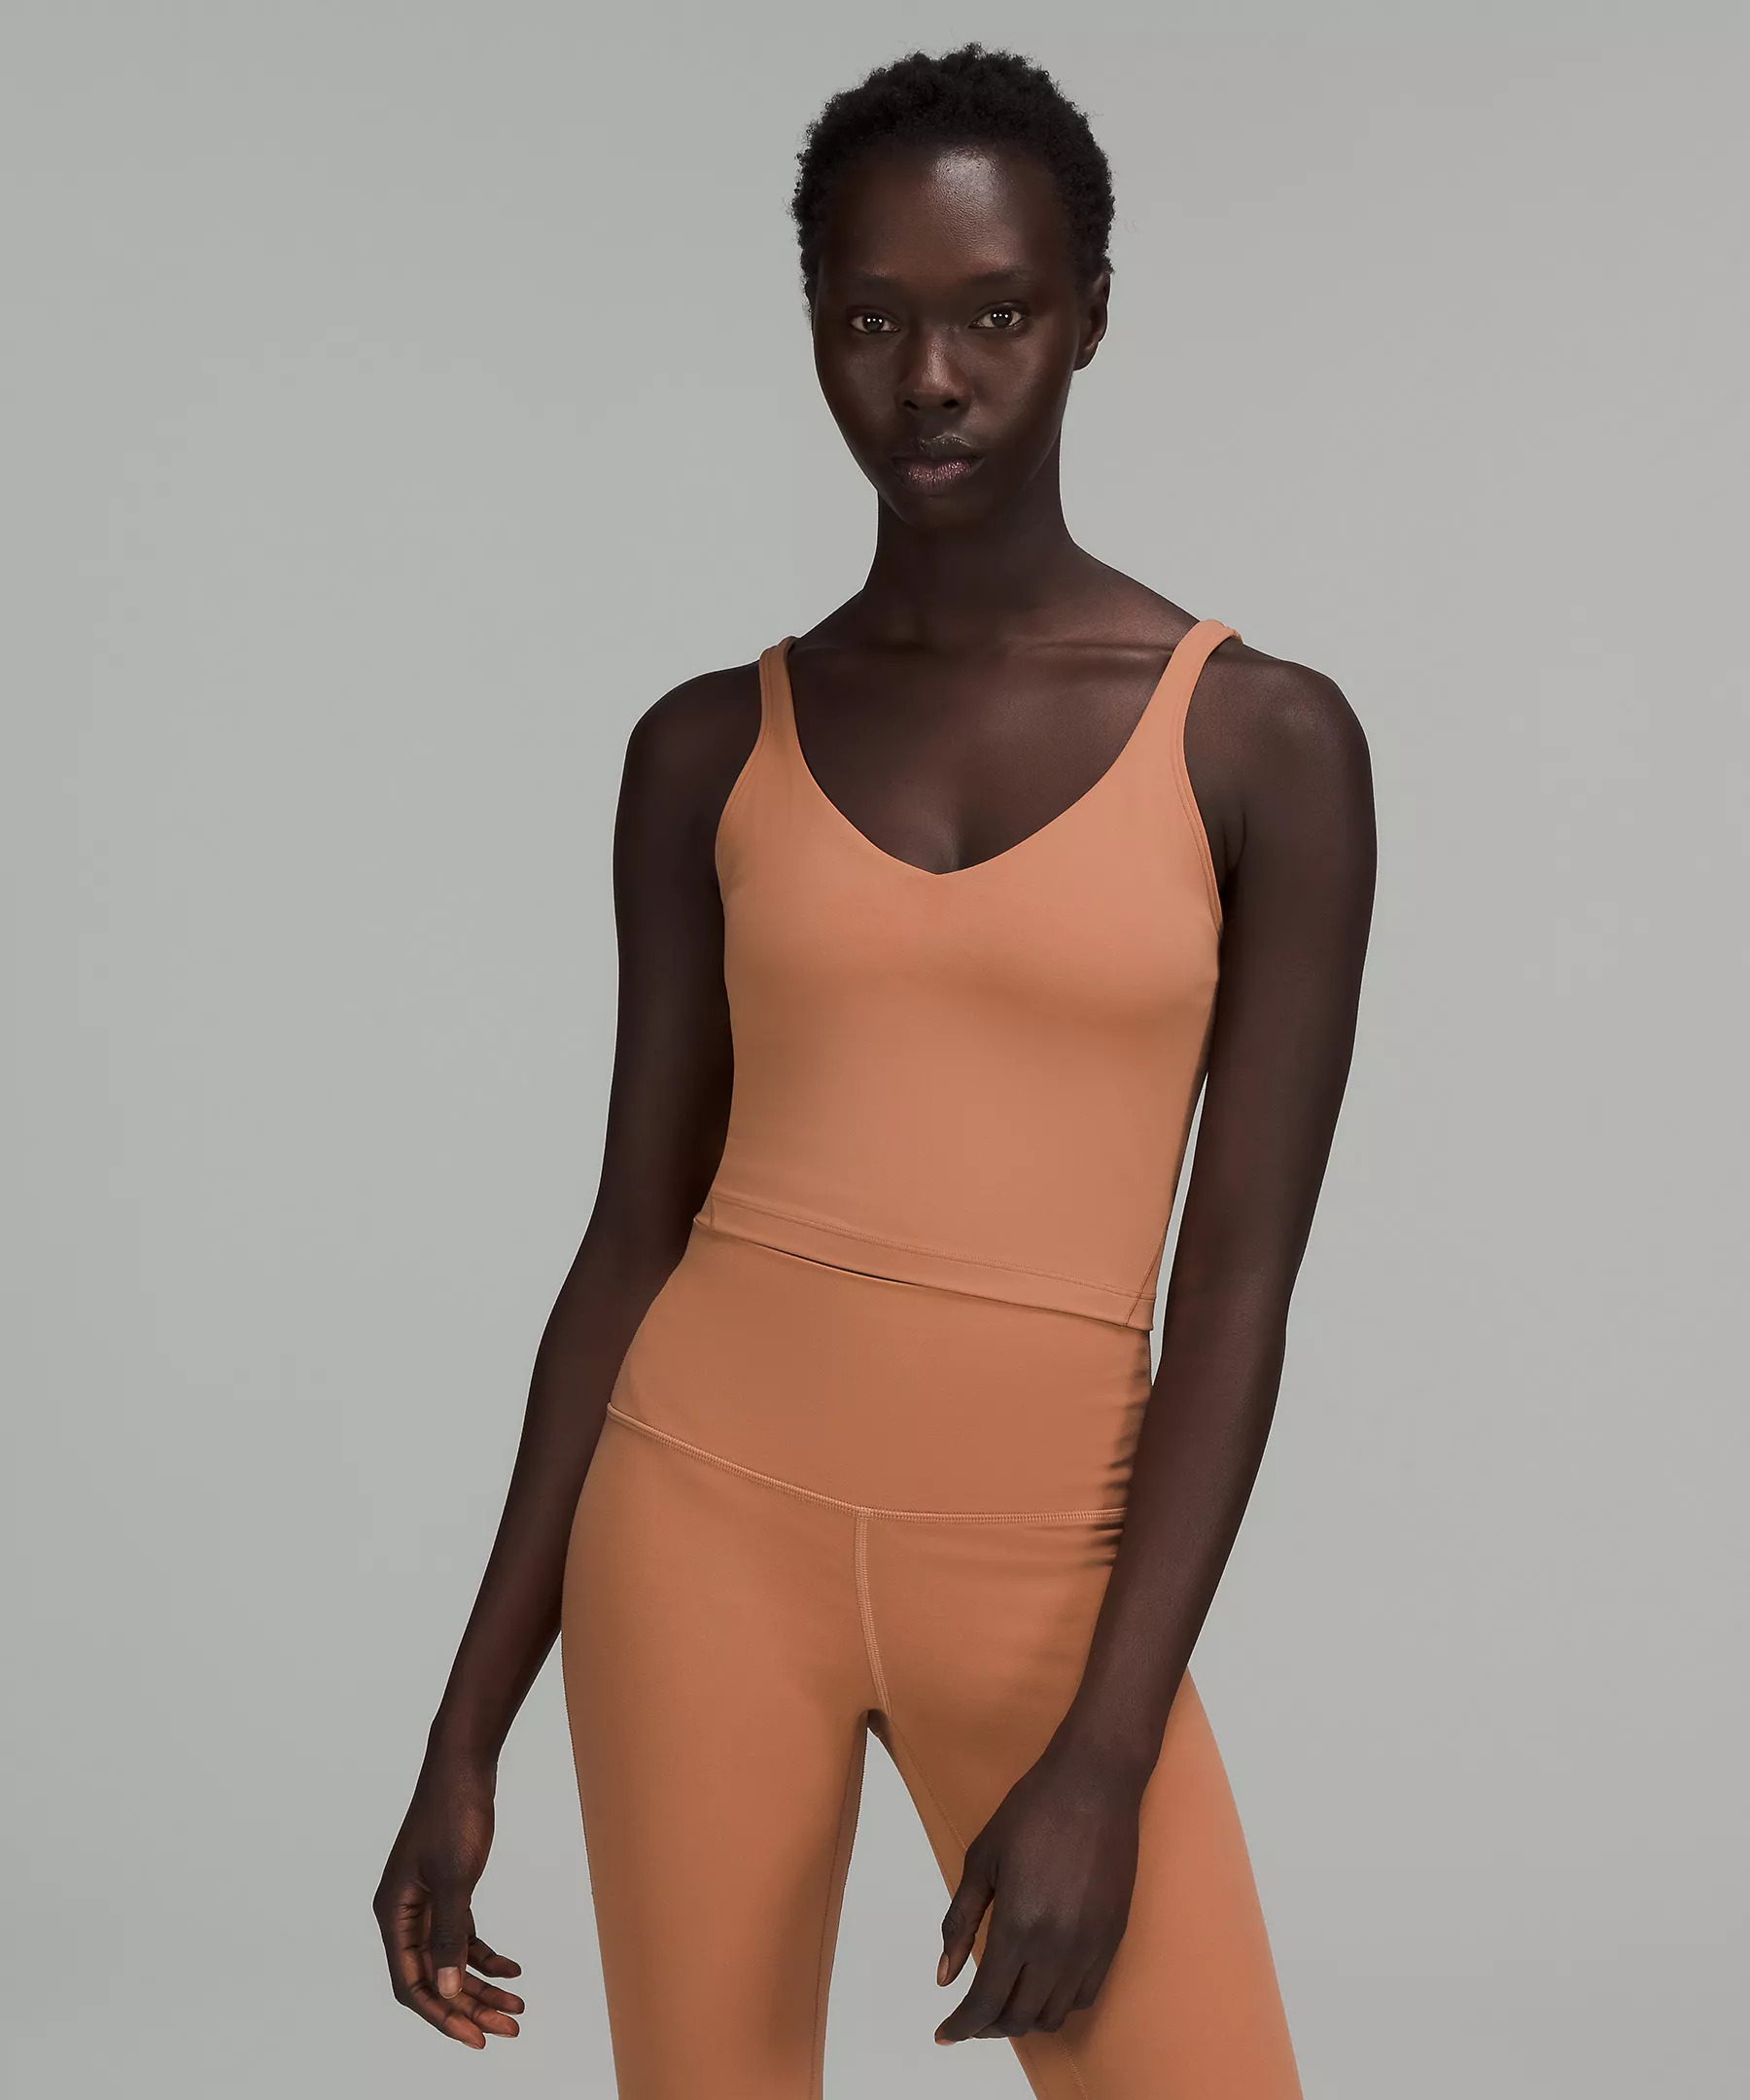 A model wearing the tank in muted orange color